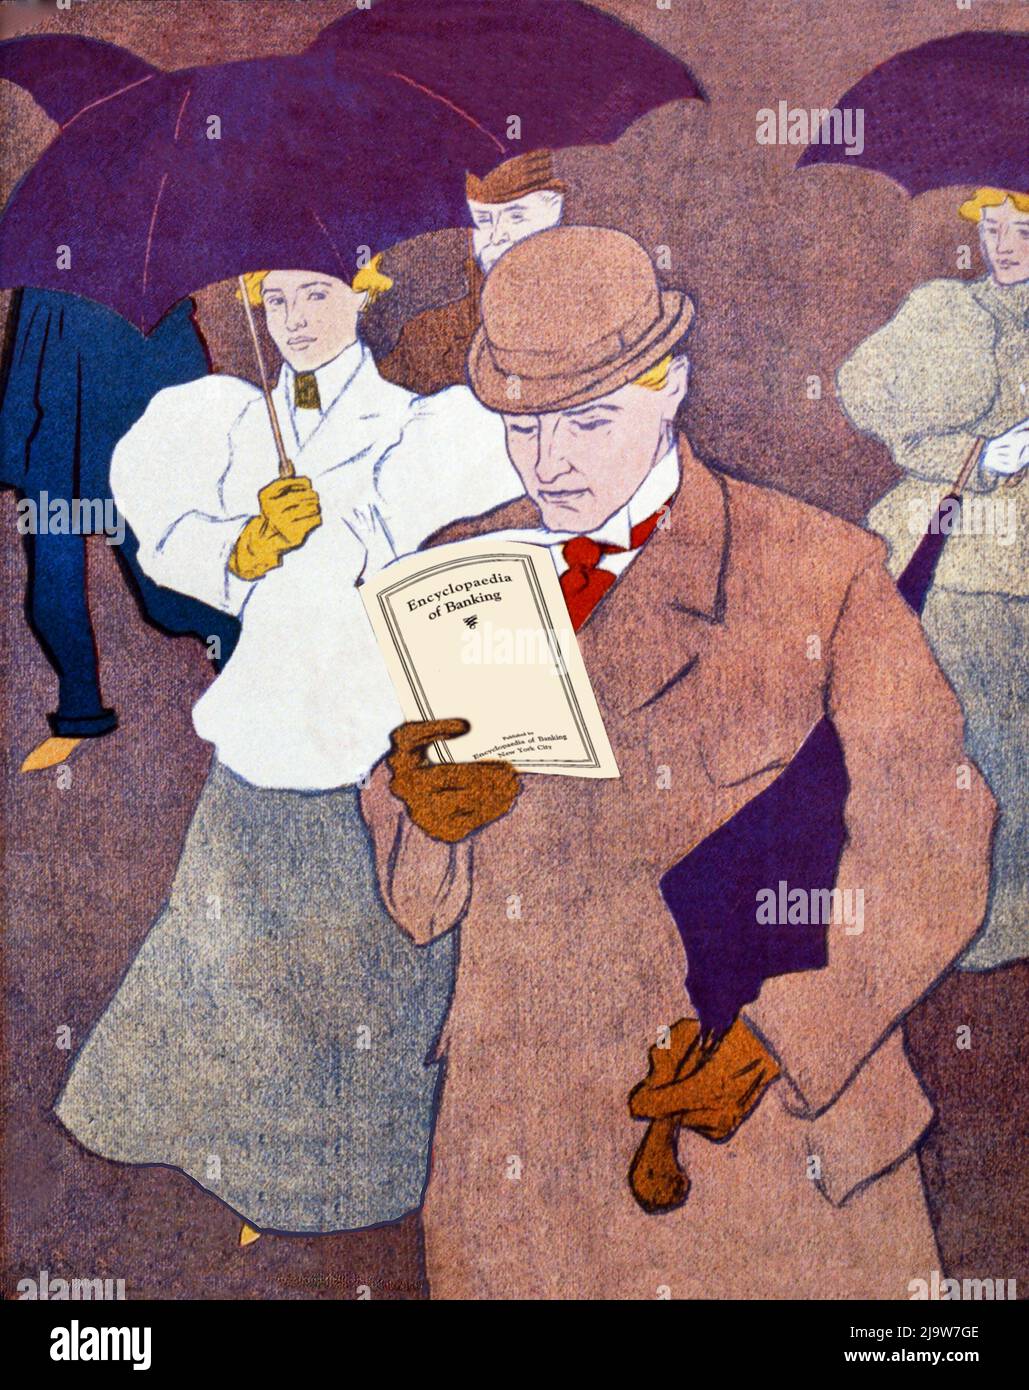 An illustration of a well dressed and fashionable man reading a book about banking in the rain. The image by Joseph J Gould (1880-1935) is a detail from a poster for Lippincott's, an American monthly literary magazine published in Philadelphia from 1868 to 1915. Stock Photo